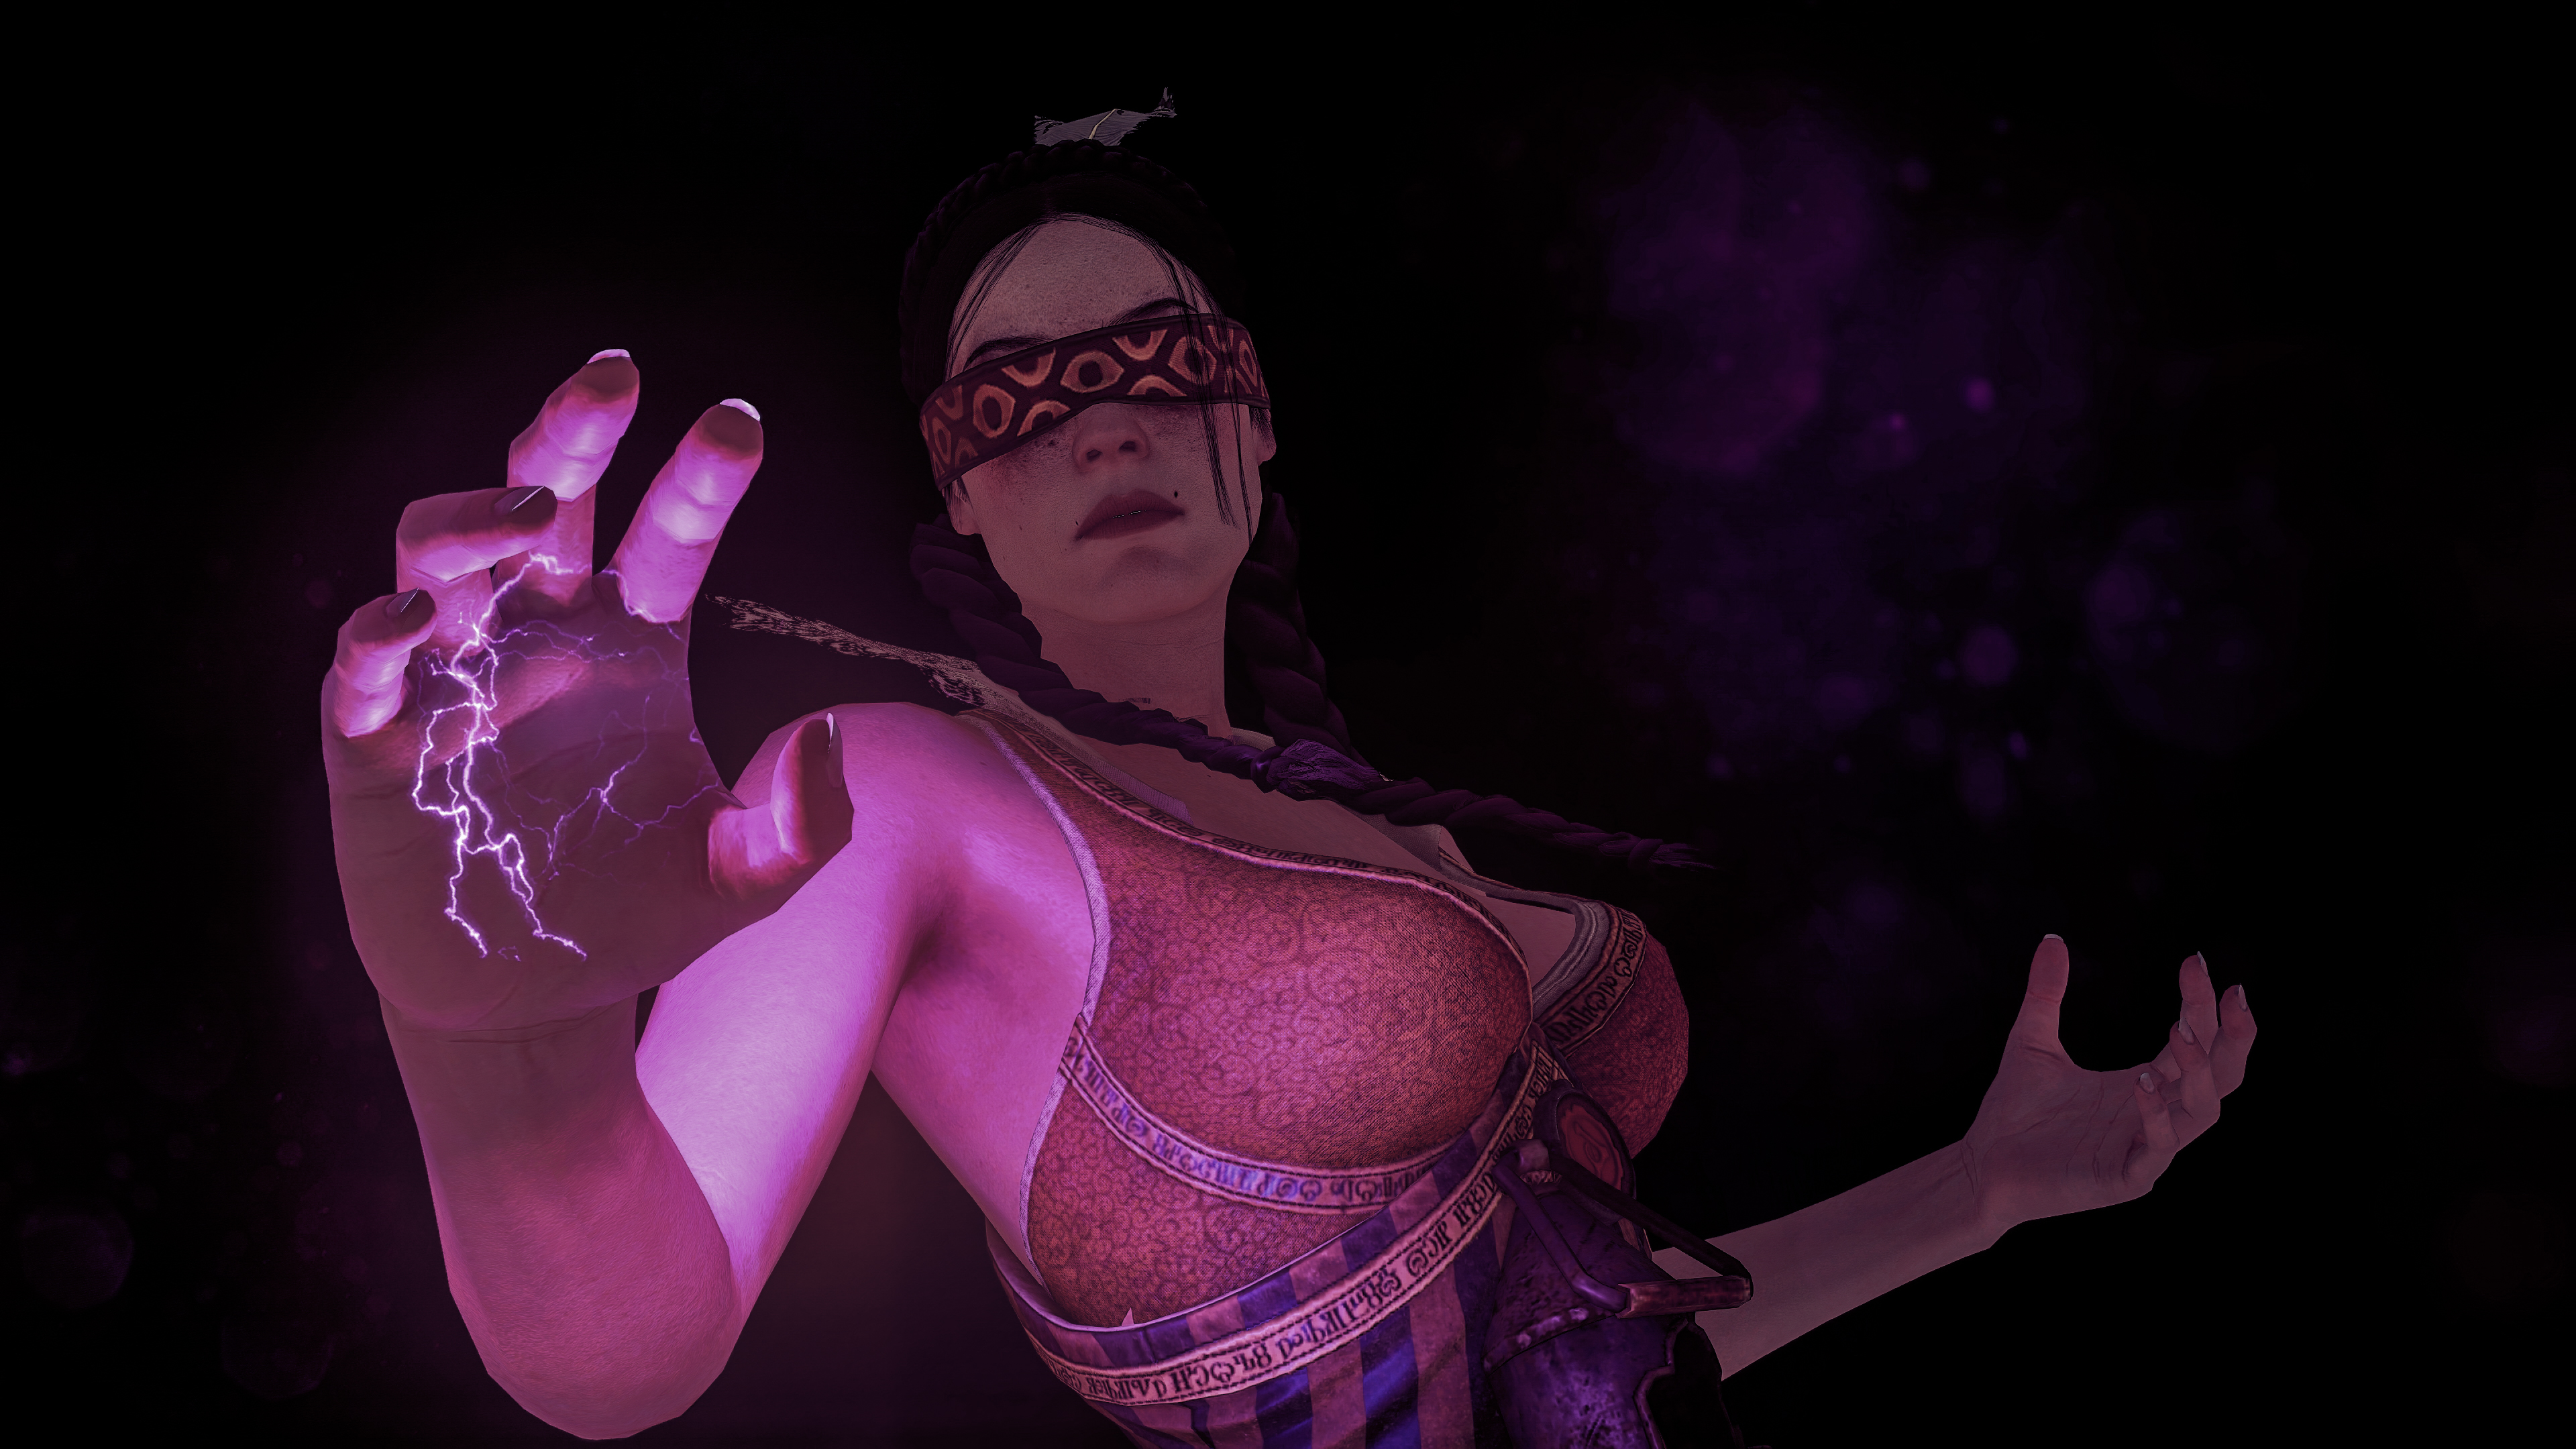 General 3840x2160 The Witcher 3: Wild Hunt PC gaming Philippa Eilhart Filippa Eilhart video games blindfold The Witcher magic sparks hands sorceress screen shot